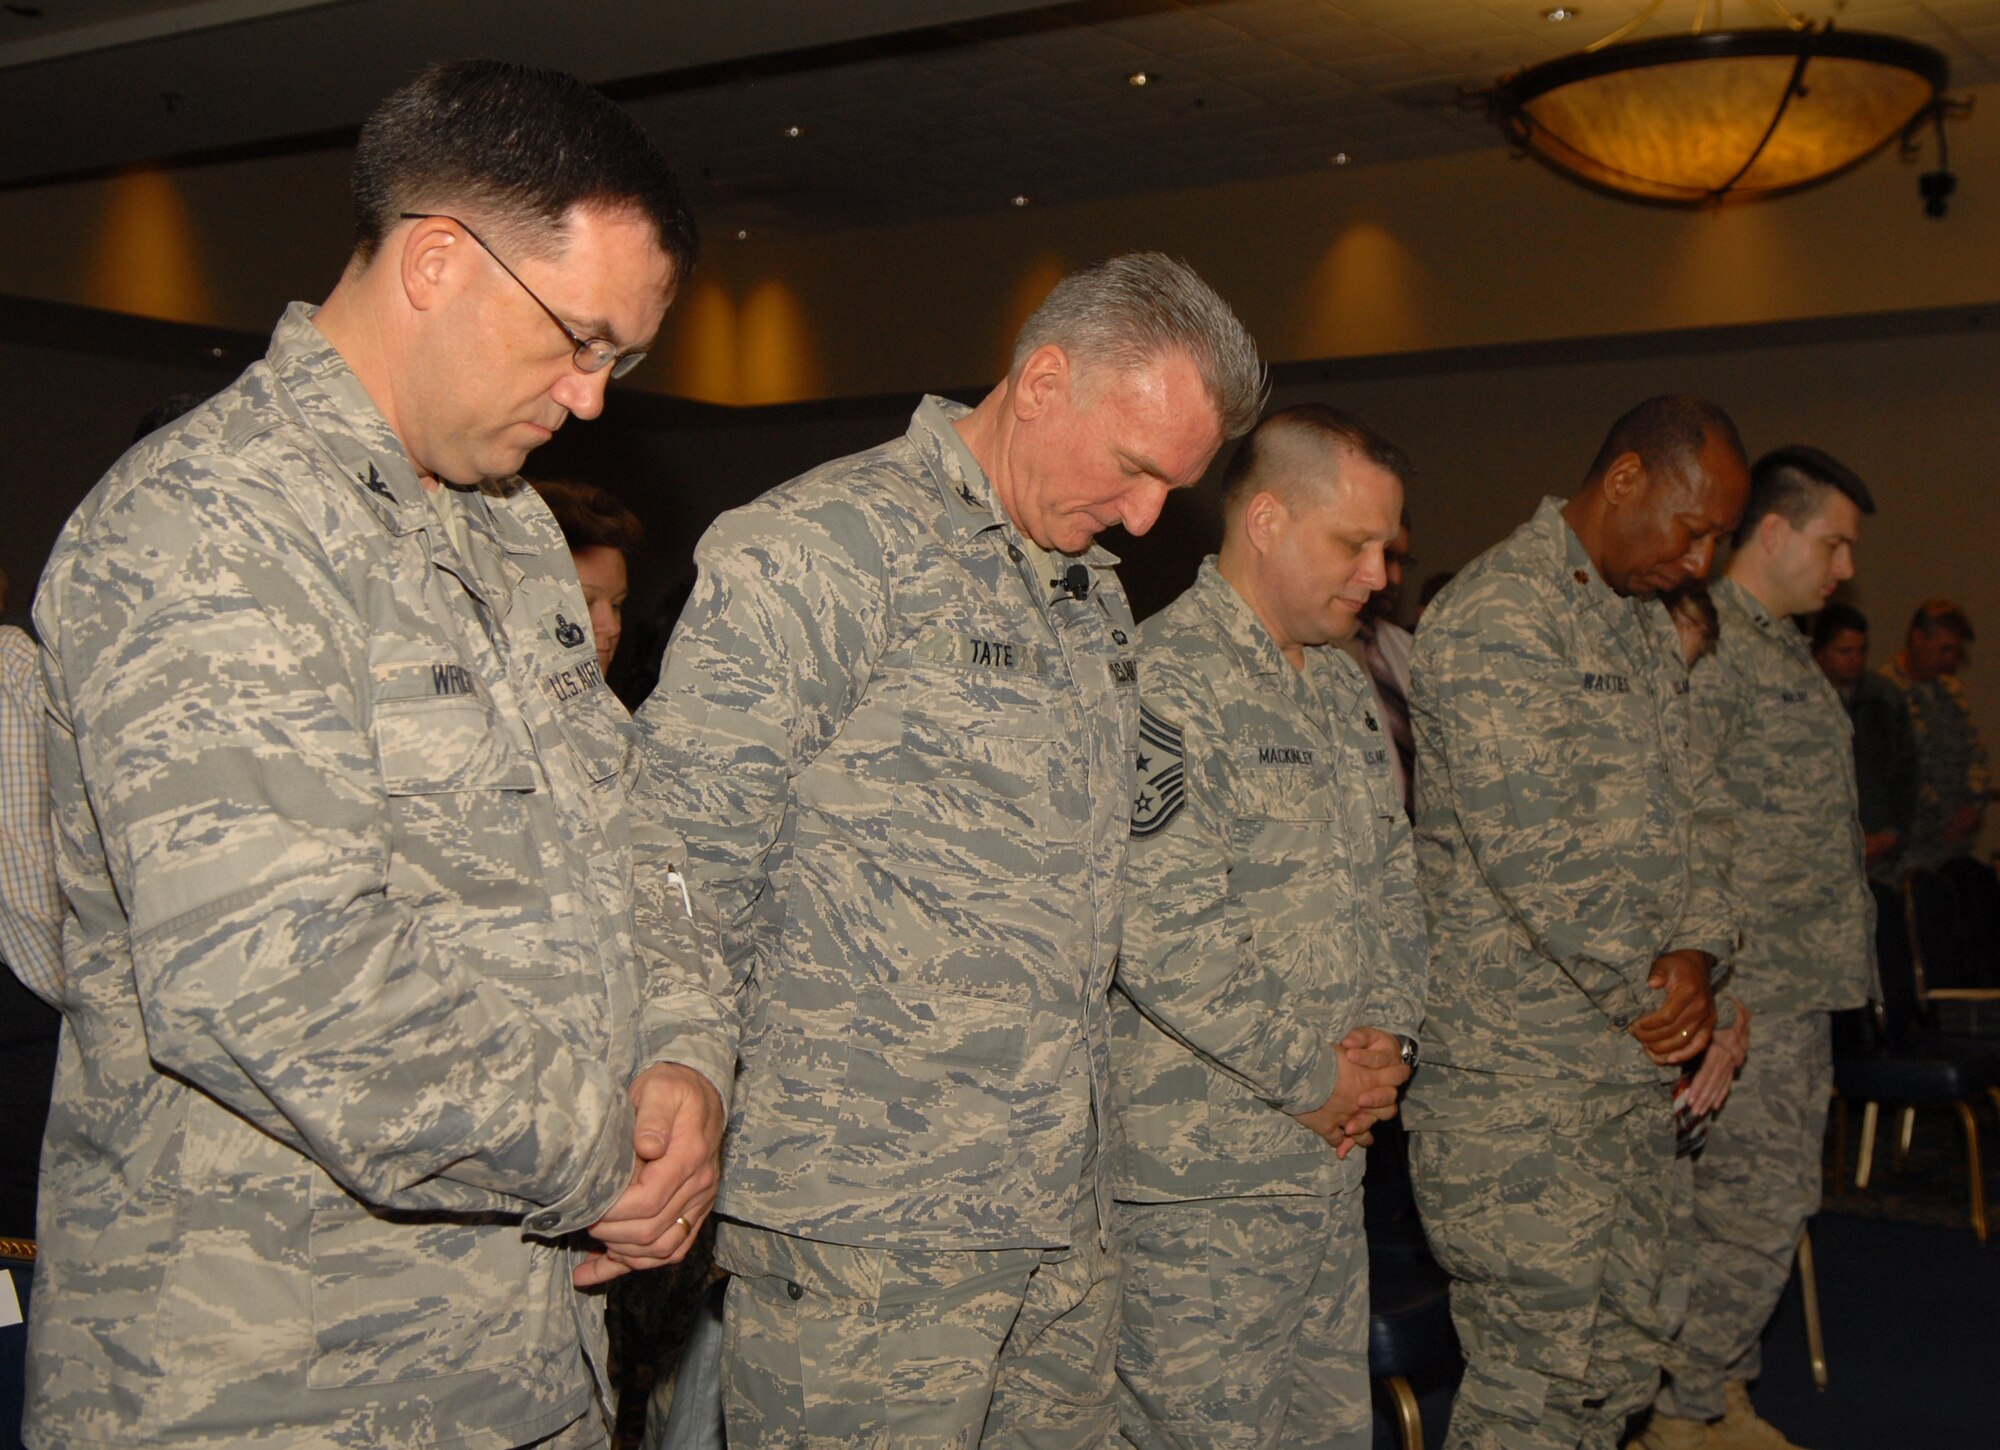 VANDENBERG AIR FORCE BASE, Calif. -- Members of Team V come together to pray during the National Prayer Breakfast at the Pacific Coast Club here Tuesday, Jan. 25, 2010. The breakfast is held annually to unite multiple religions in prayer for the U.S.(U.S. Air Force photo/Airman 1st Class Kerelin Molina)